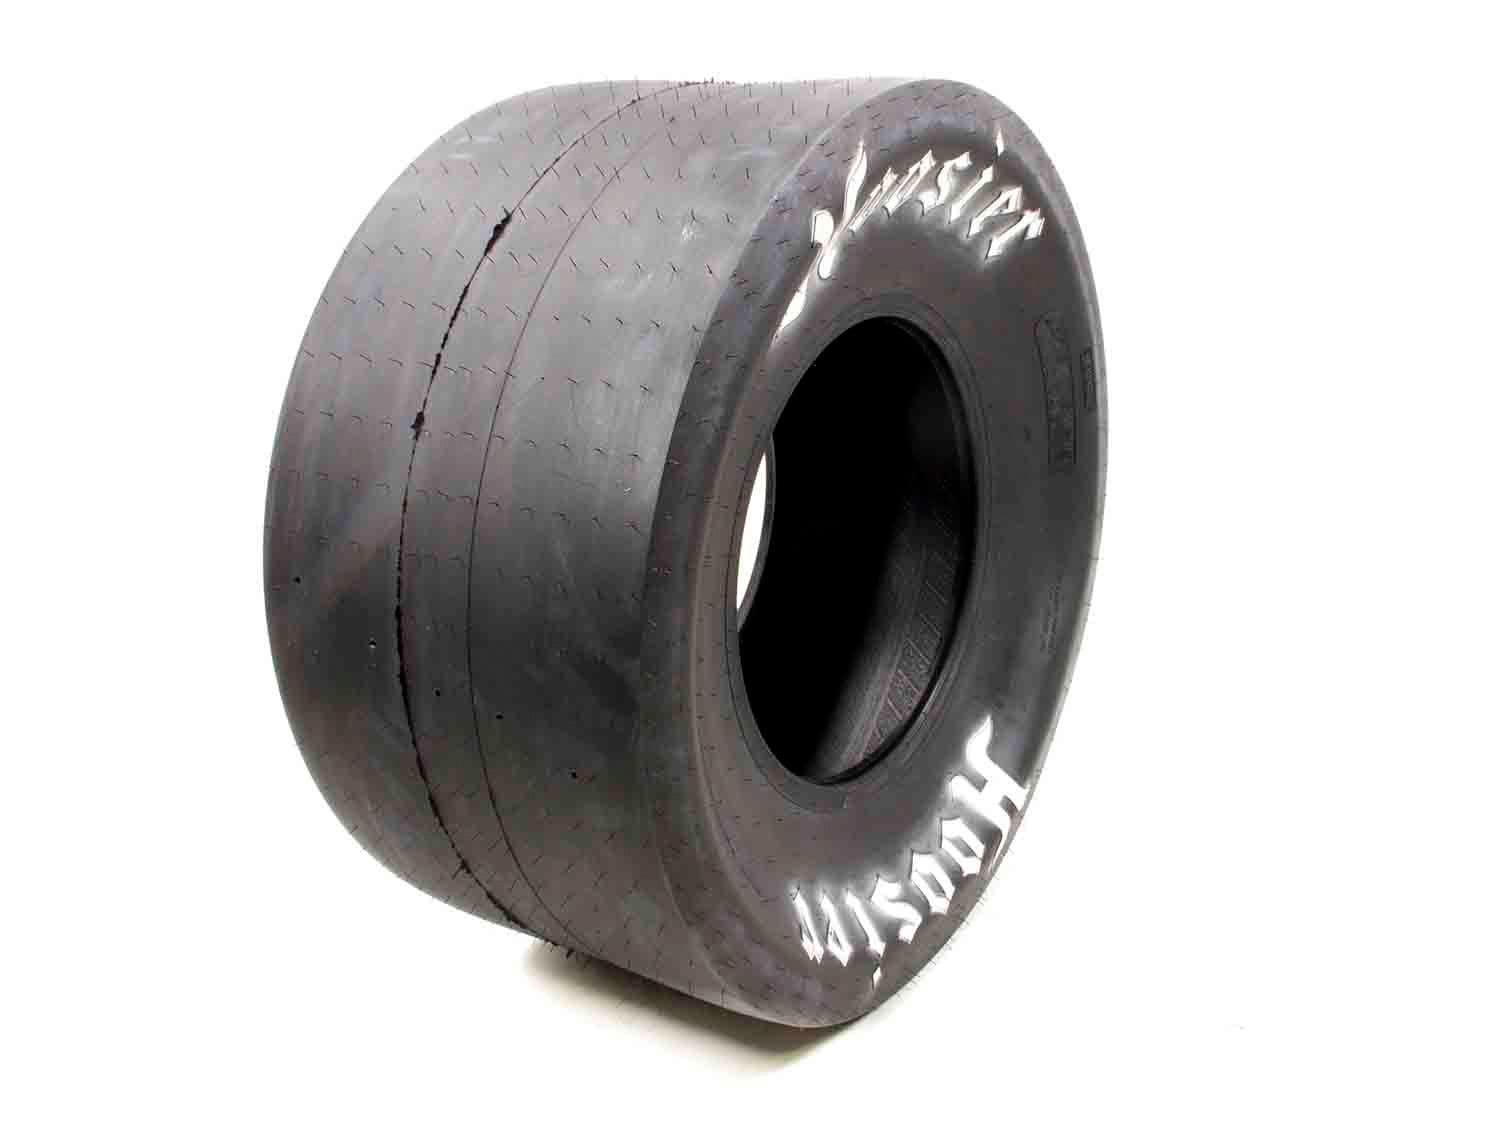 29.5/10.5-15R Radial Drag Tire - Burlile Performance Products